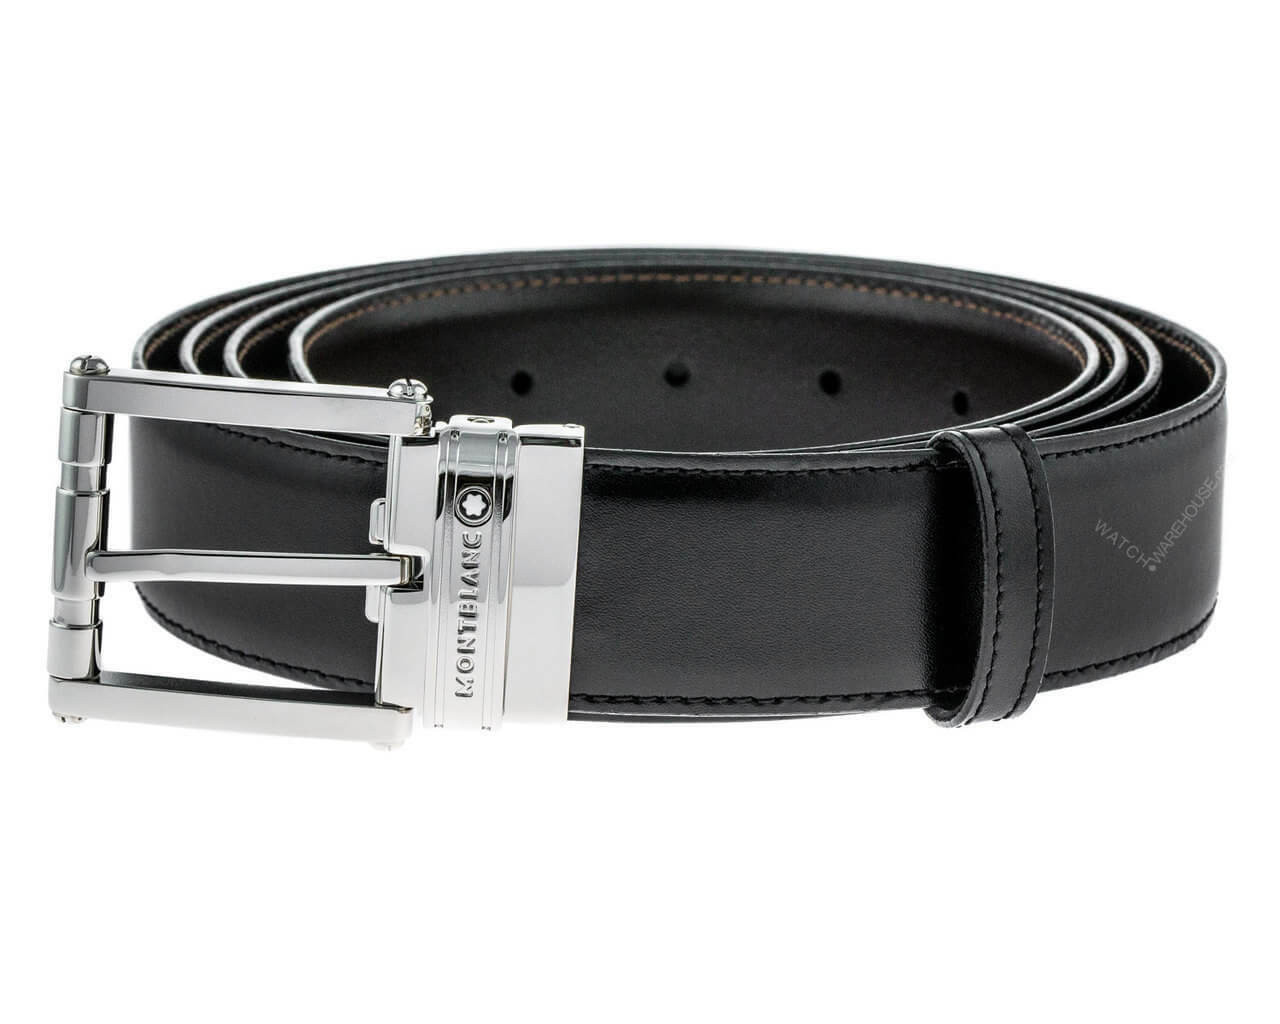 MONTBLANC Calfskin Leather Men's Belt| Fast and Free US Shipping ...